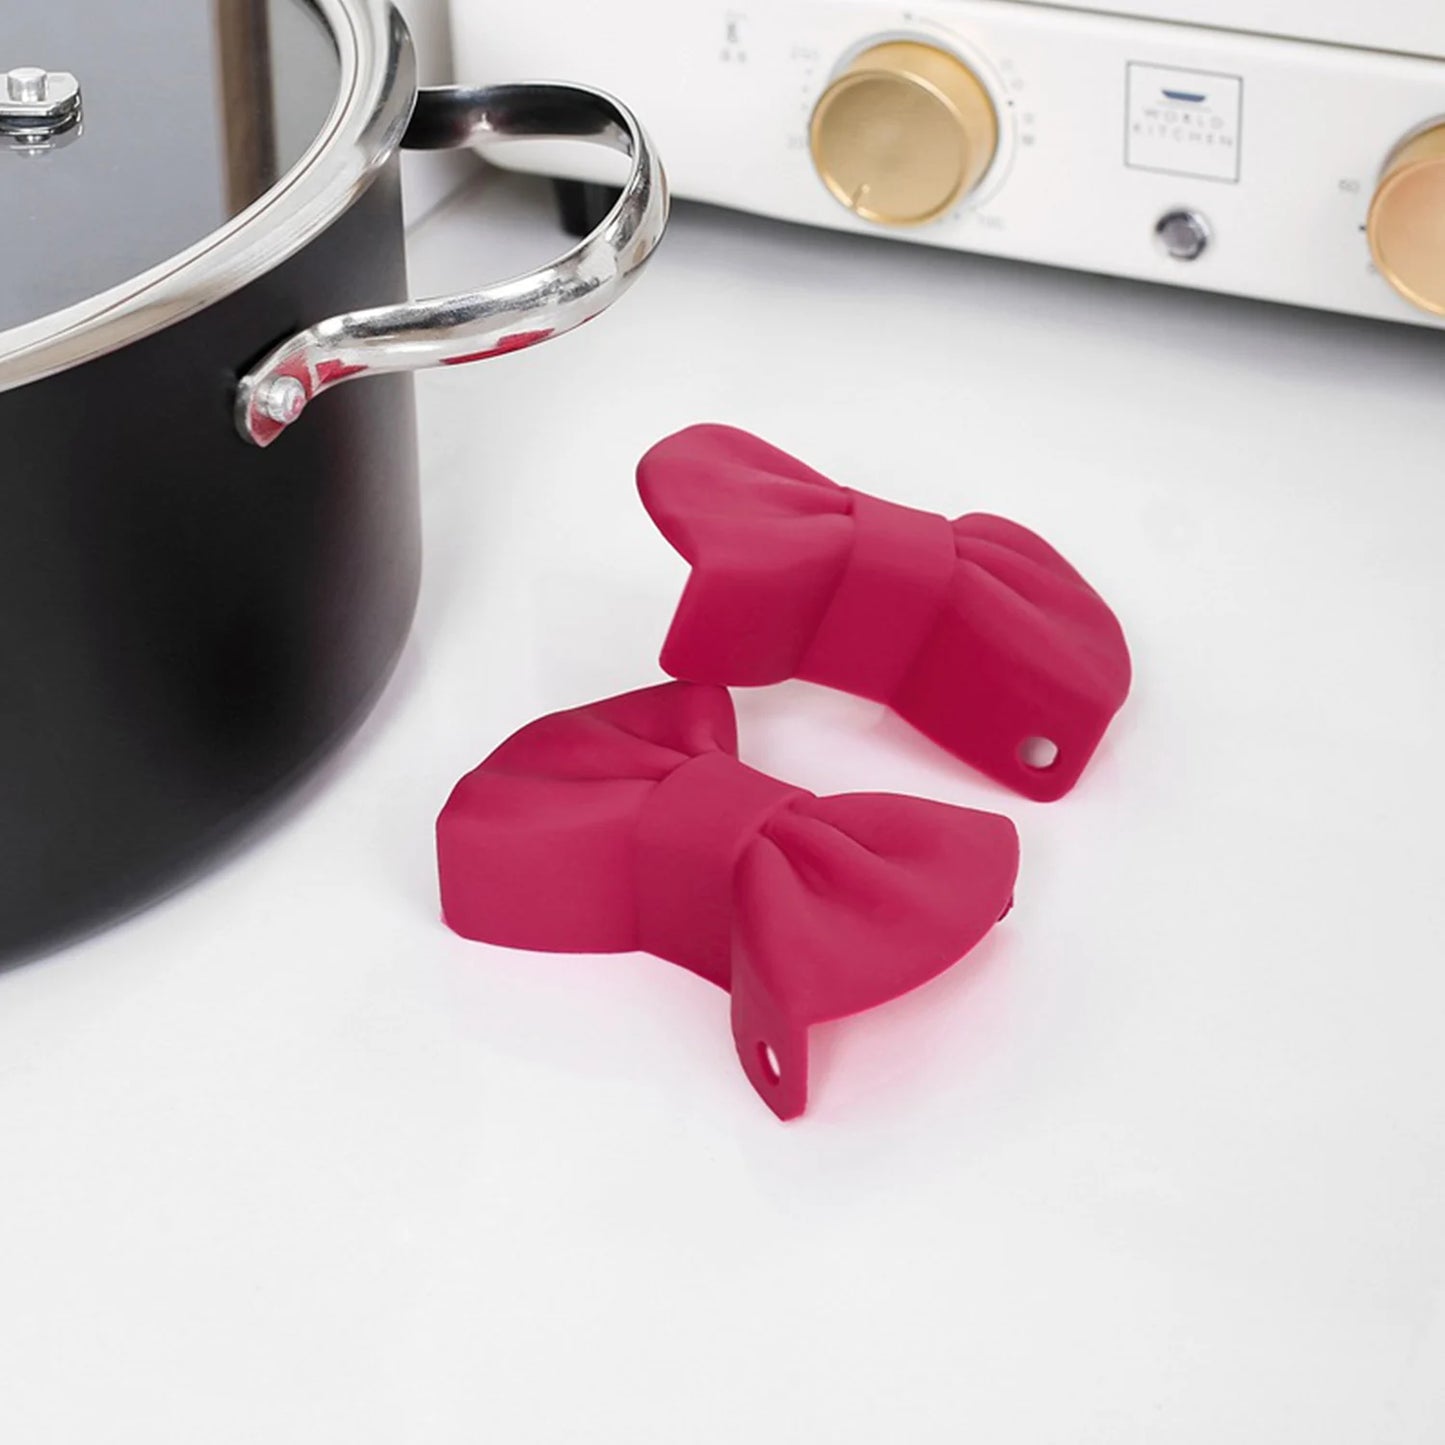 2pcs Silicone Bow Oven Mitts